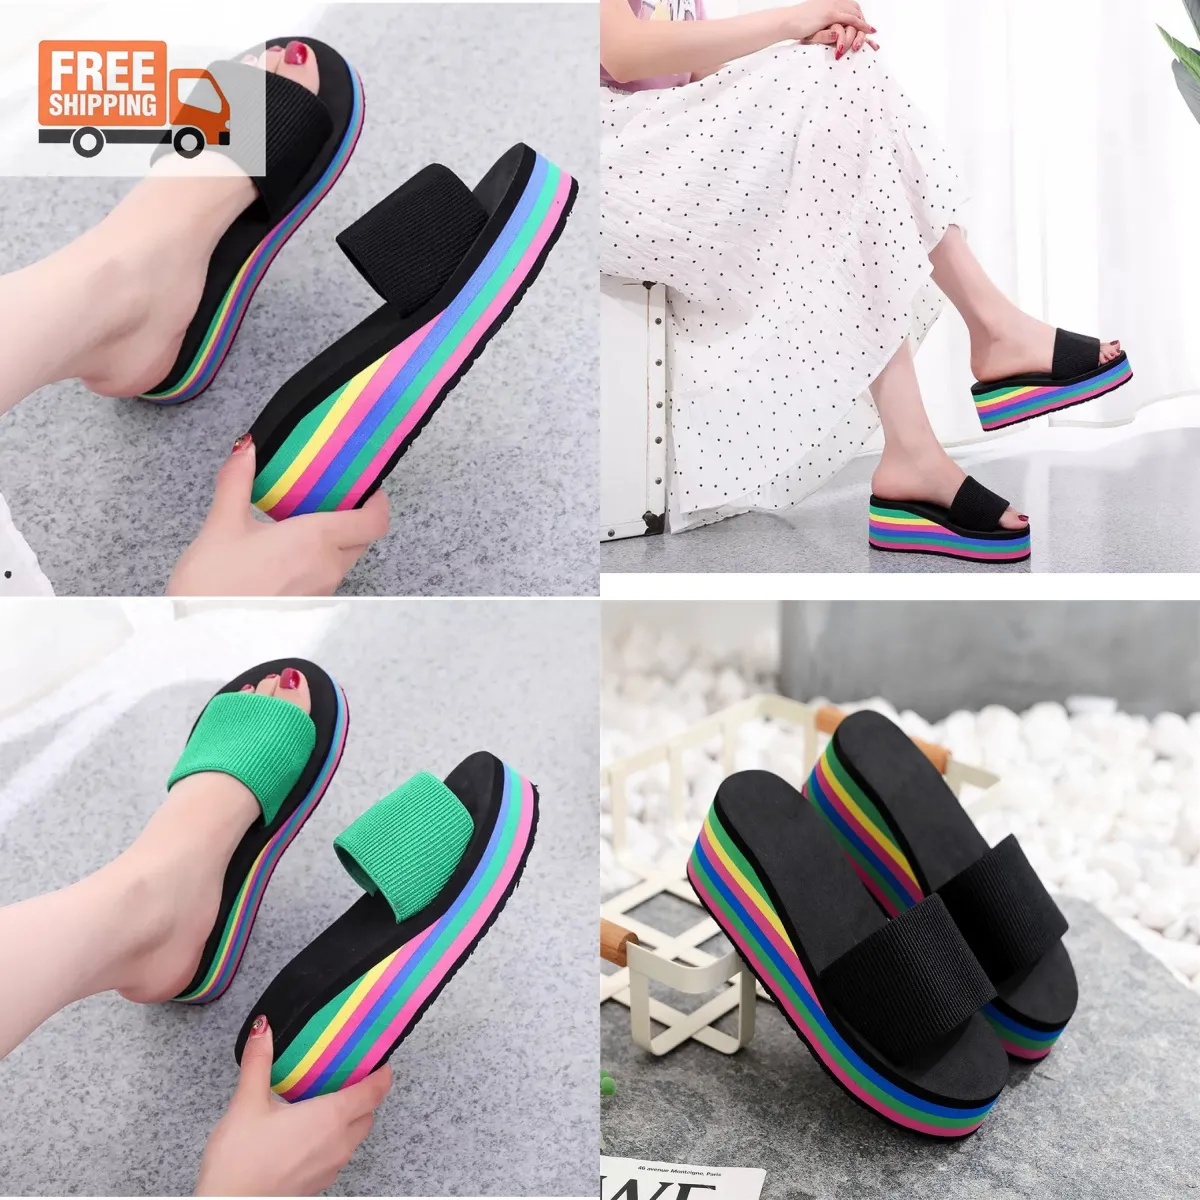 Stea Designer Slippers Women's Summer Heel Sandals Multi-Colorals Quality Adhicle Slippers Printed Platform Slippers Beach Fashion Sports Slippers Gai